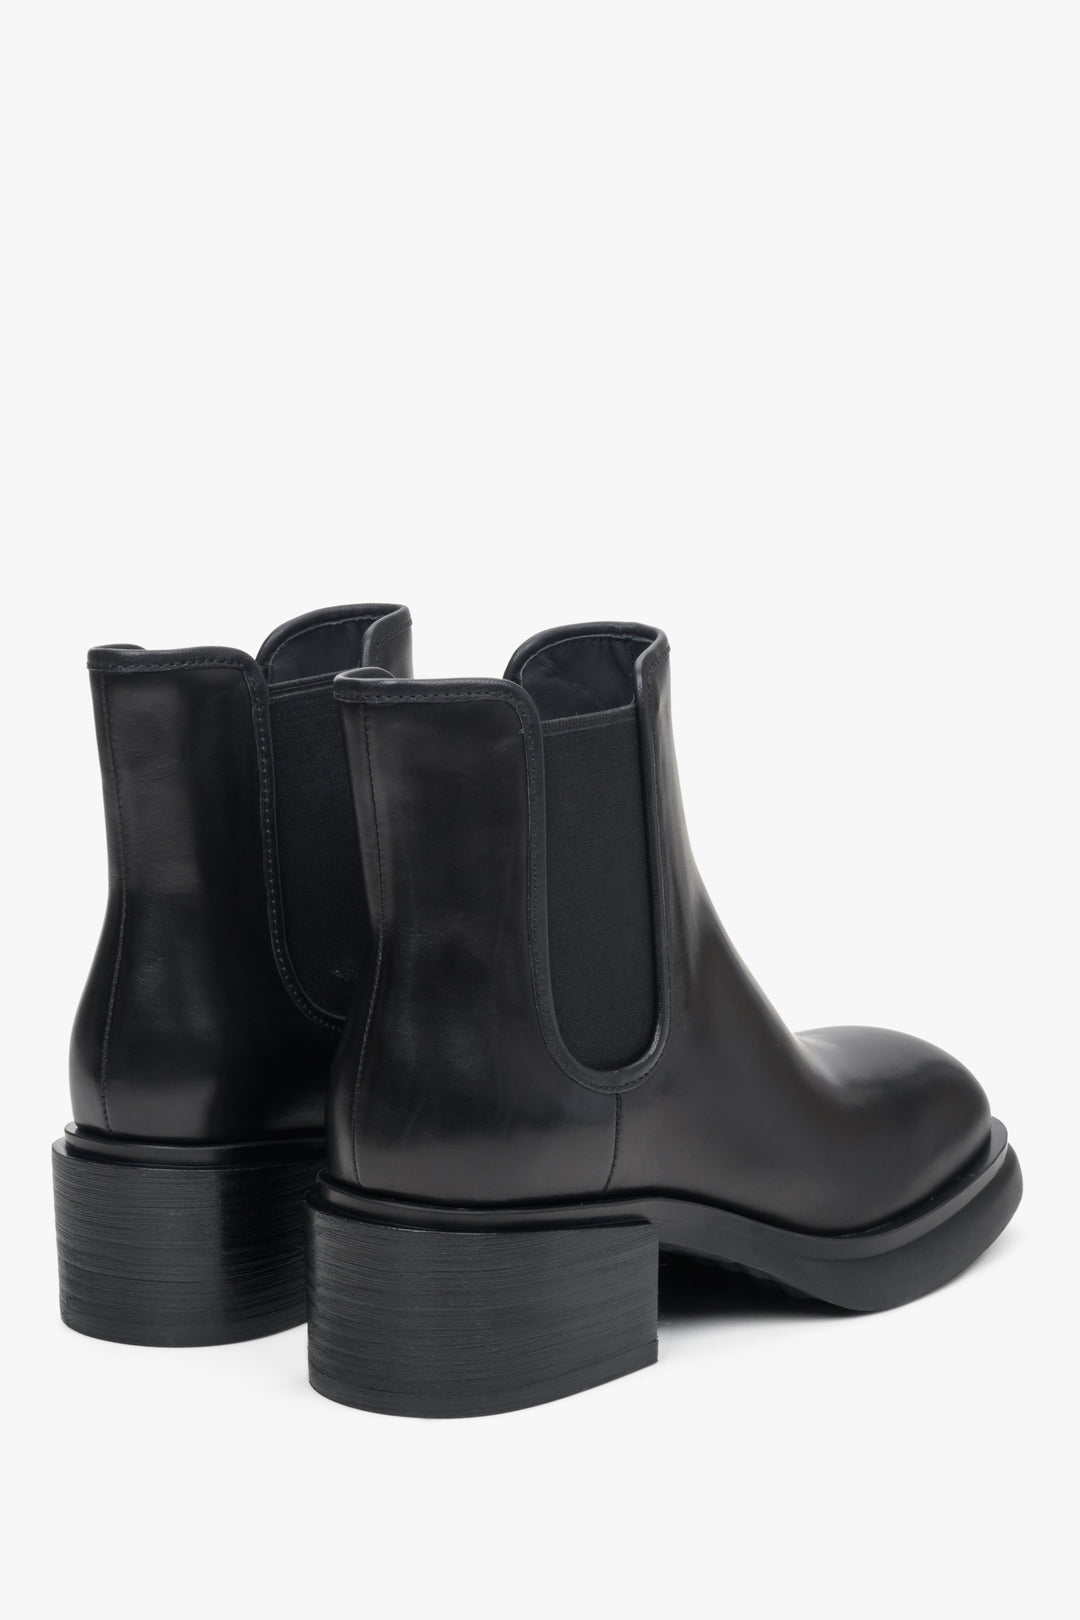 Women's black leather ankle boots Estro - a cose-up on a heel counter.